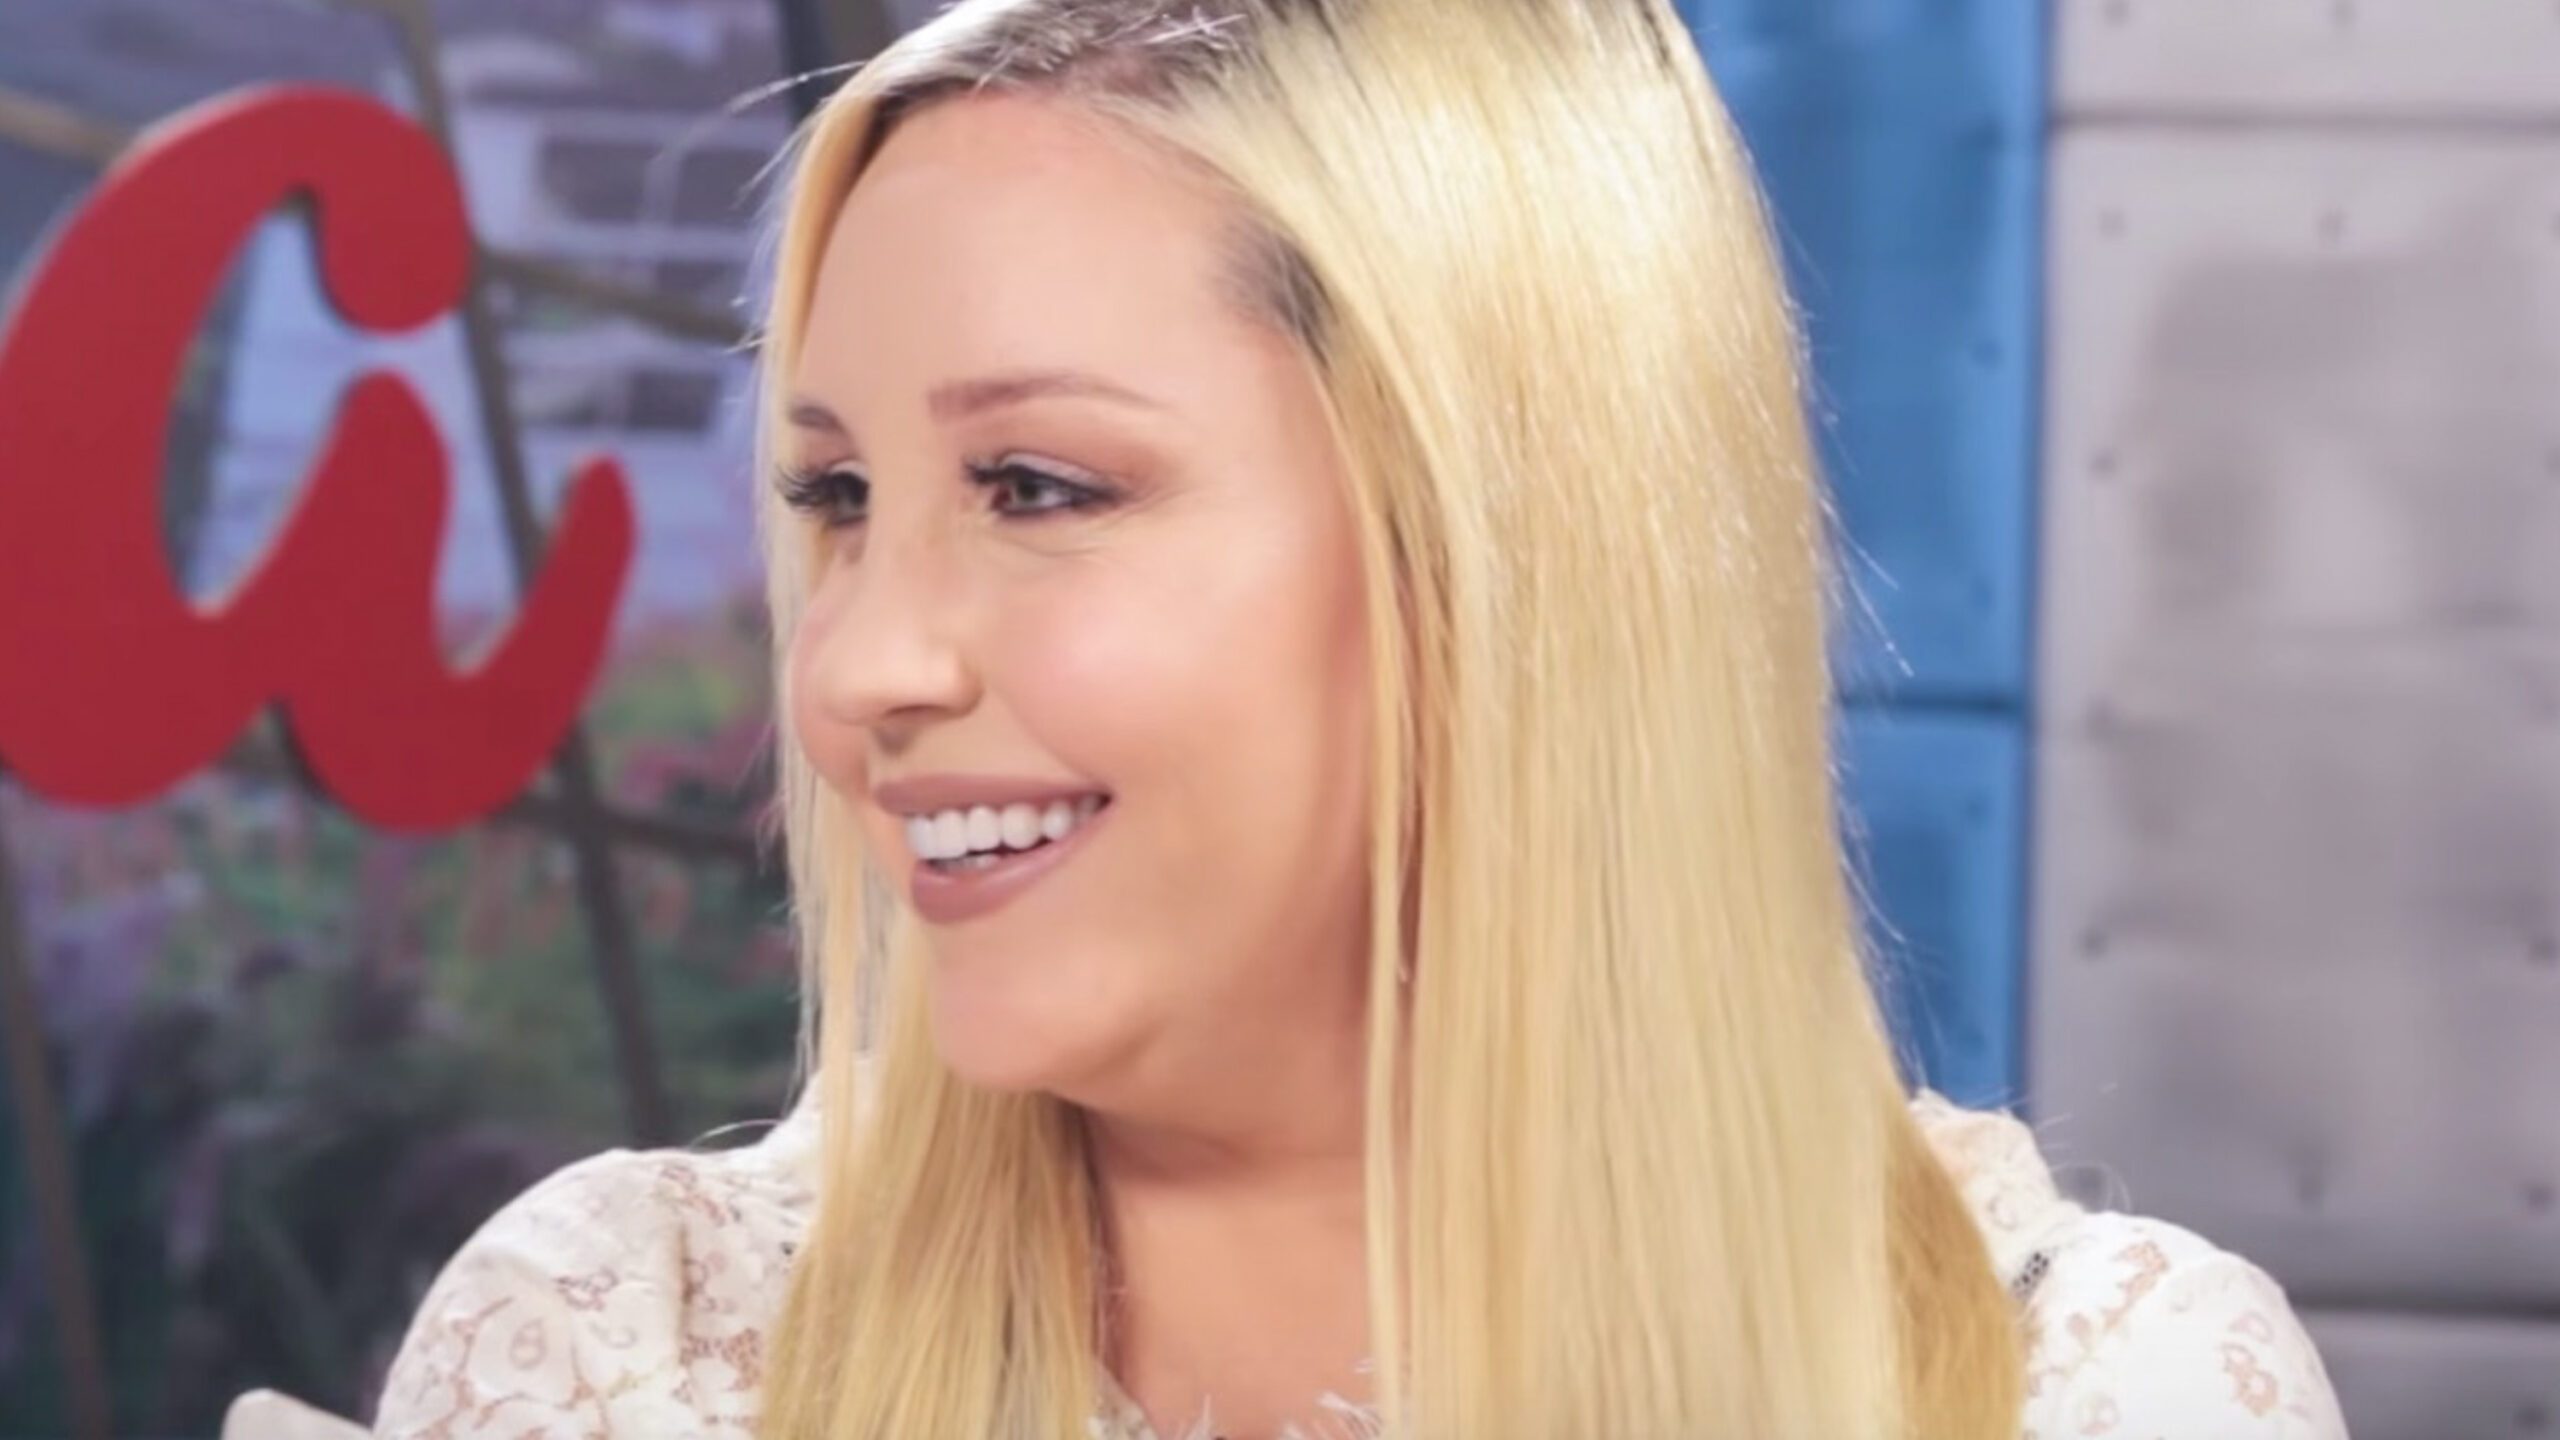 WATCH: Amanda Bynes’ first interview in 4 years